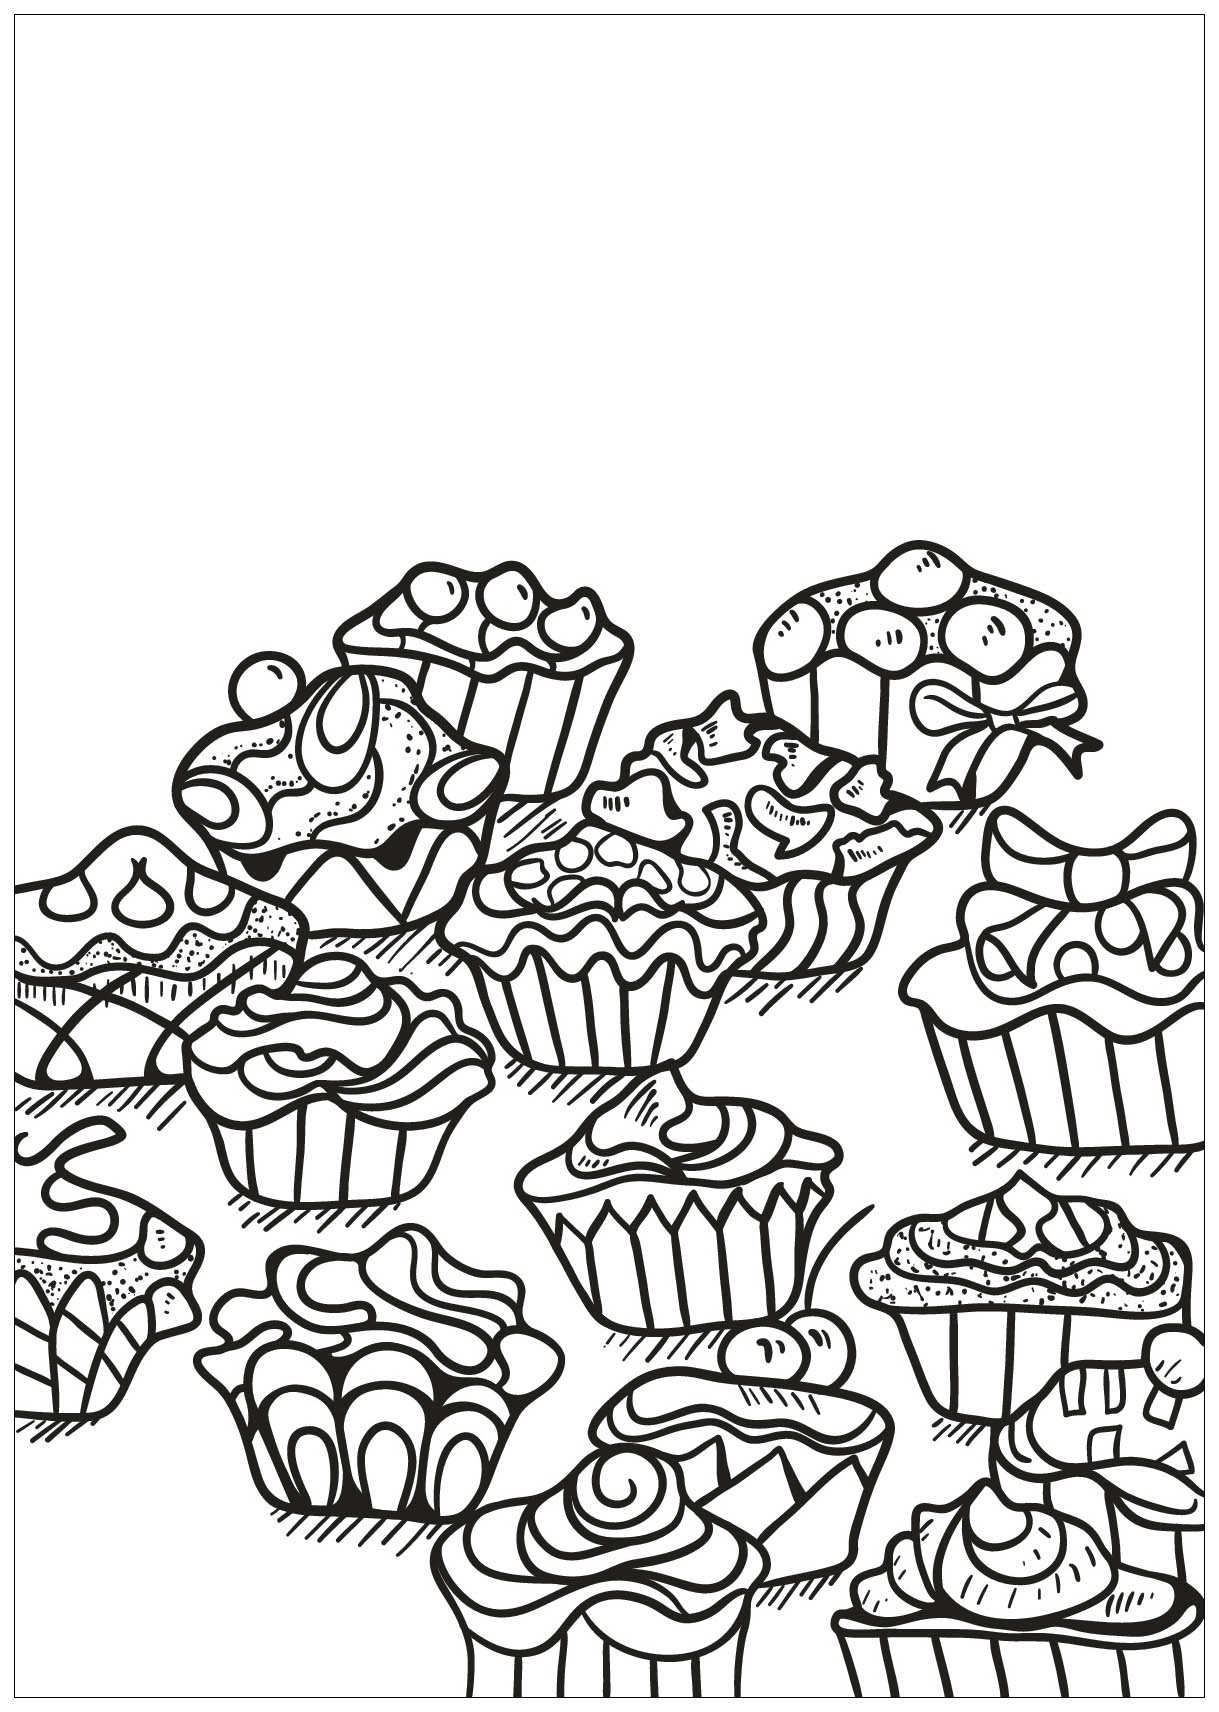 Cup cakes 66951